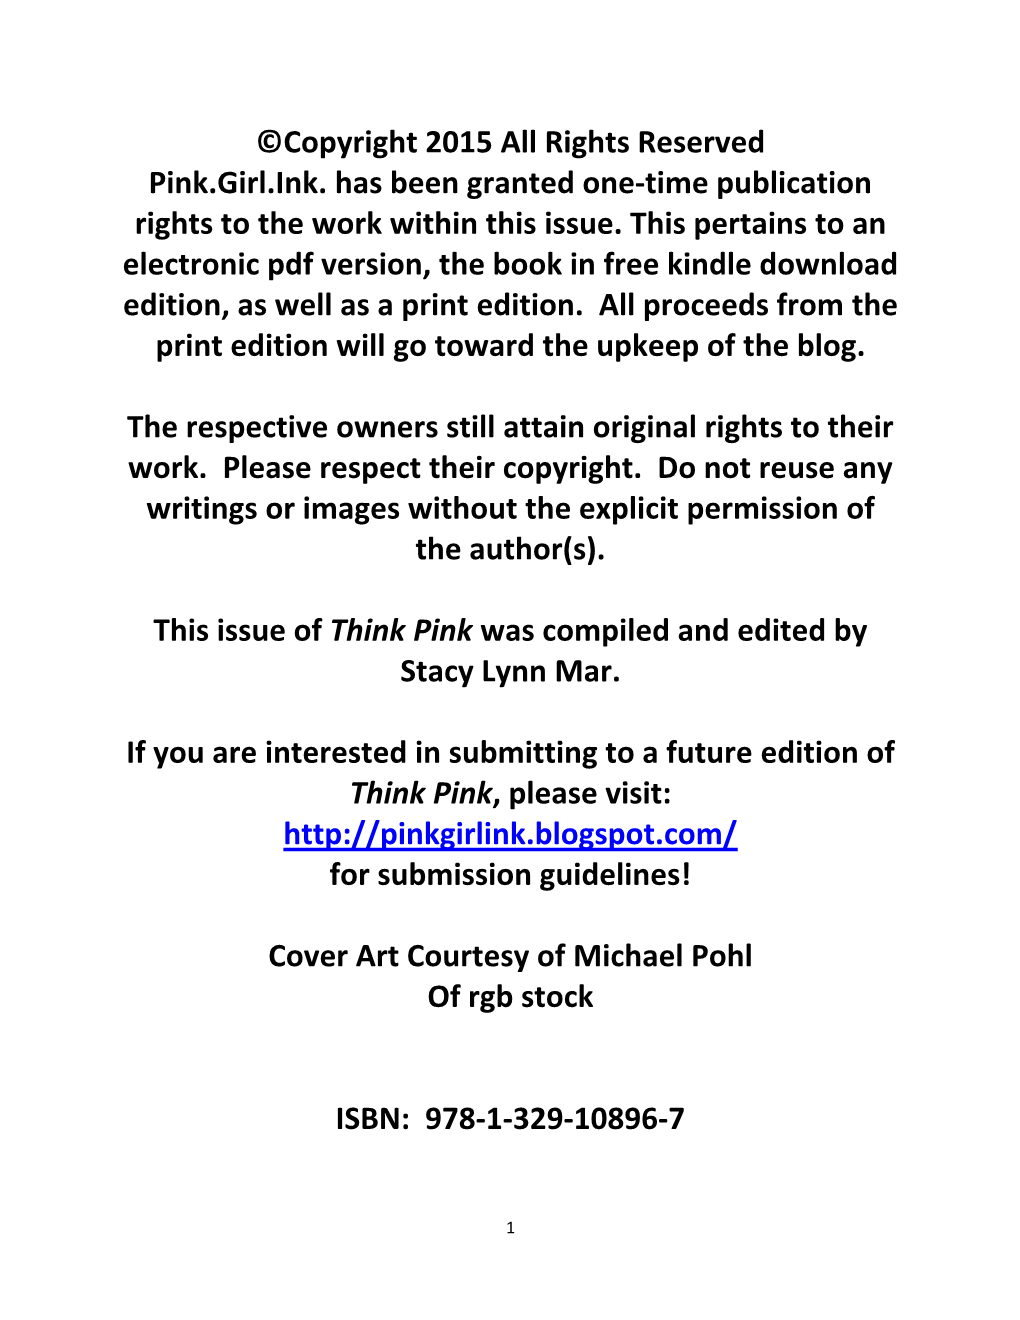 Copyright 2015 All Rights Reserved Pink.Girl.Ink. Has Been Granted One-Time Publication Rights to the Work Within This Issue